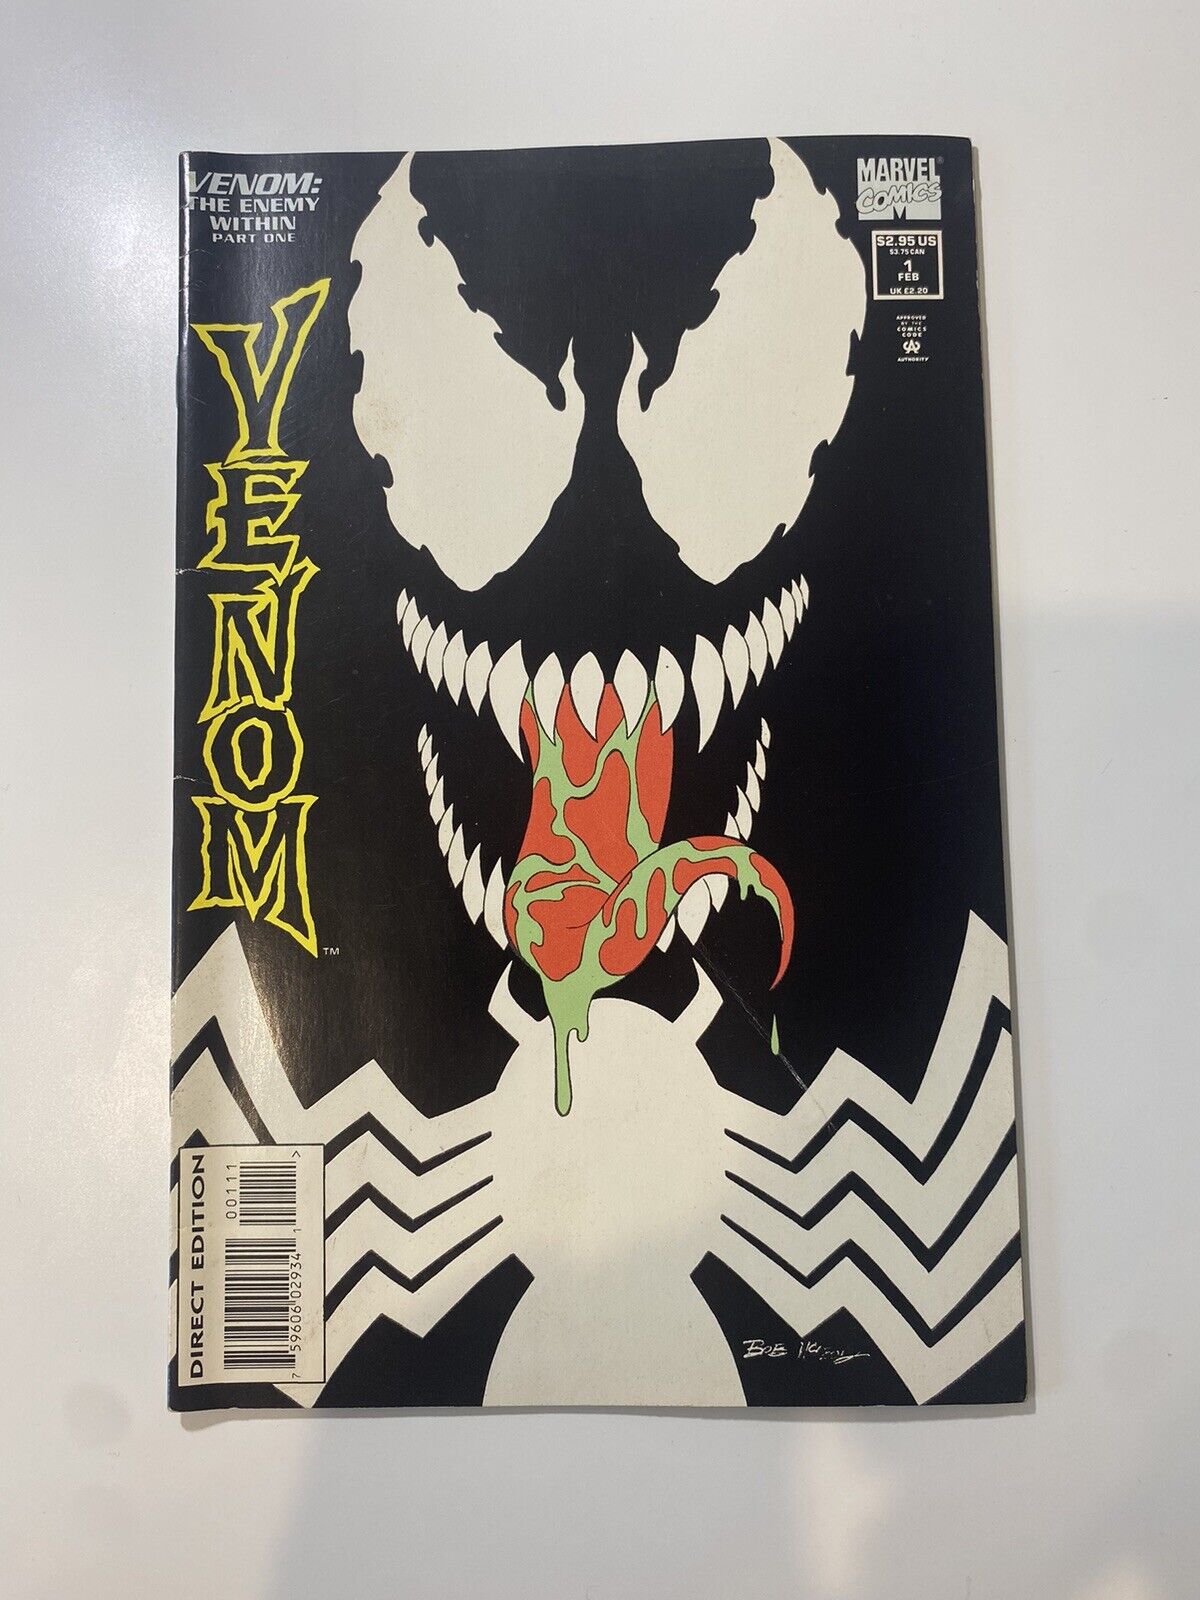 Venom The Enemy Within #1 Part One (Marvel Comics 1994) FN+